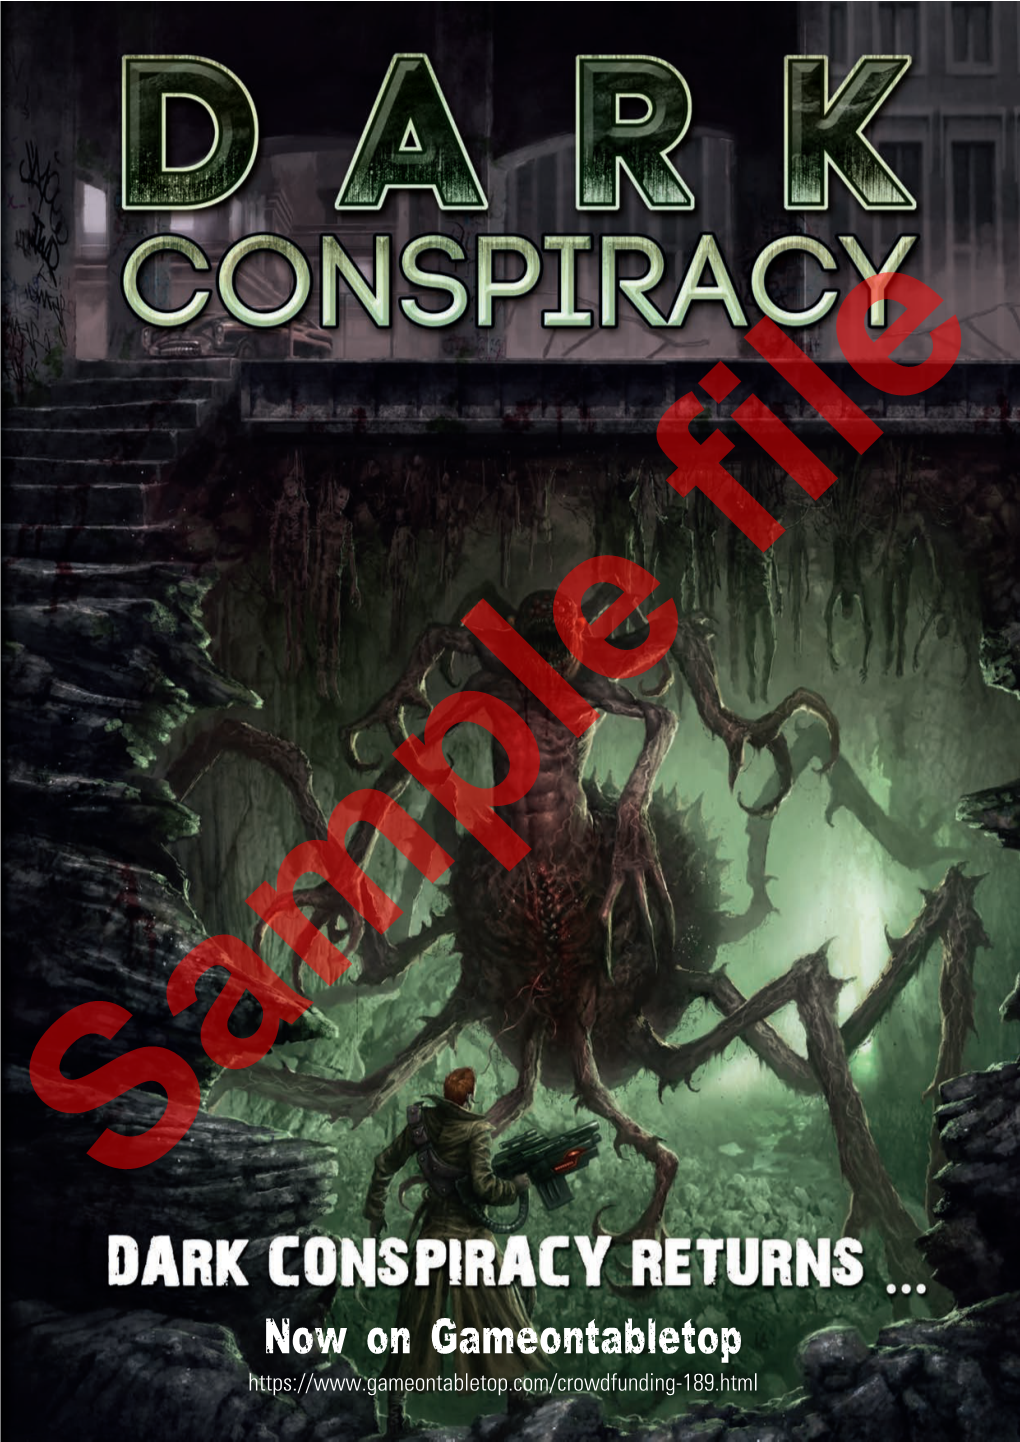 Now on Gameontabletop WHAT IS DARK CONSPIRACY